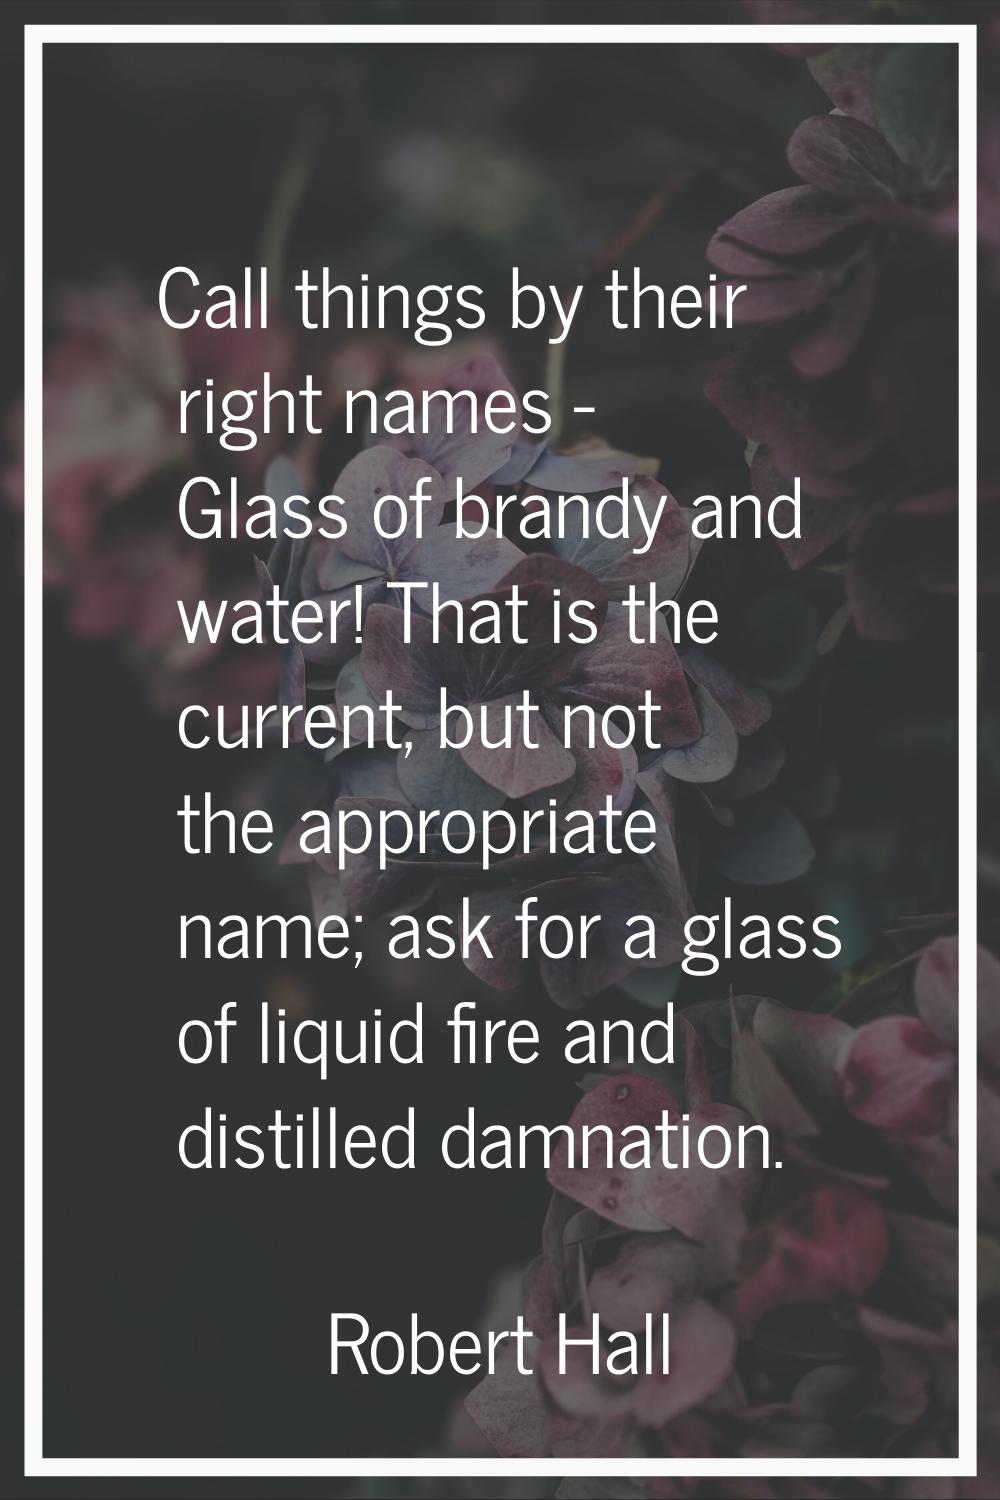 Call things by their right names - Glass of brandy and water! That is the current, but not the appr